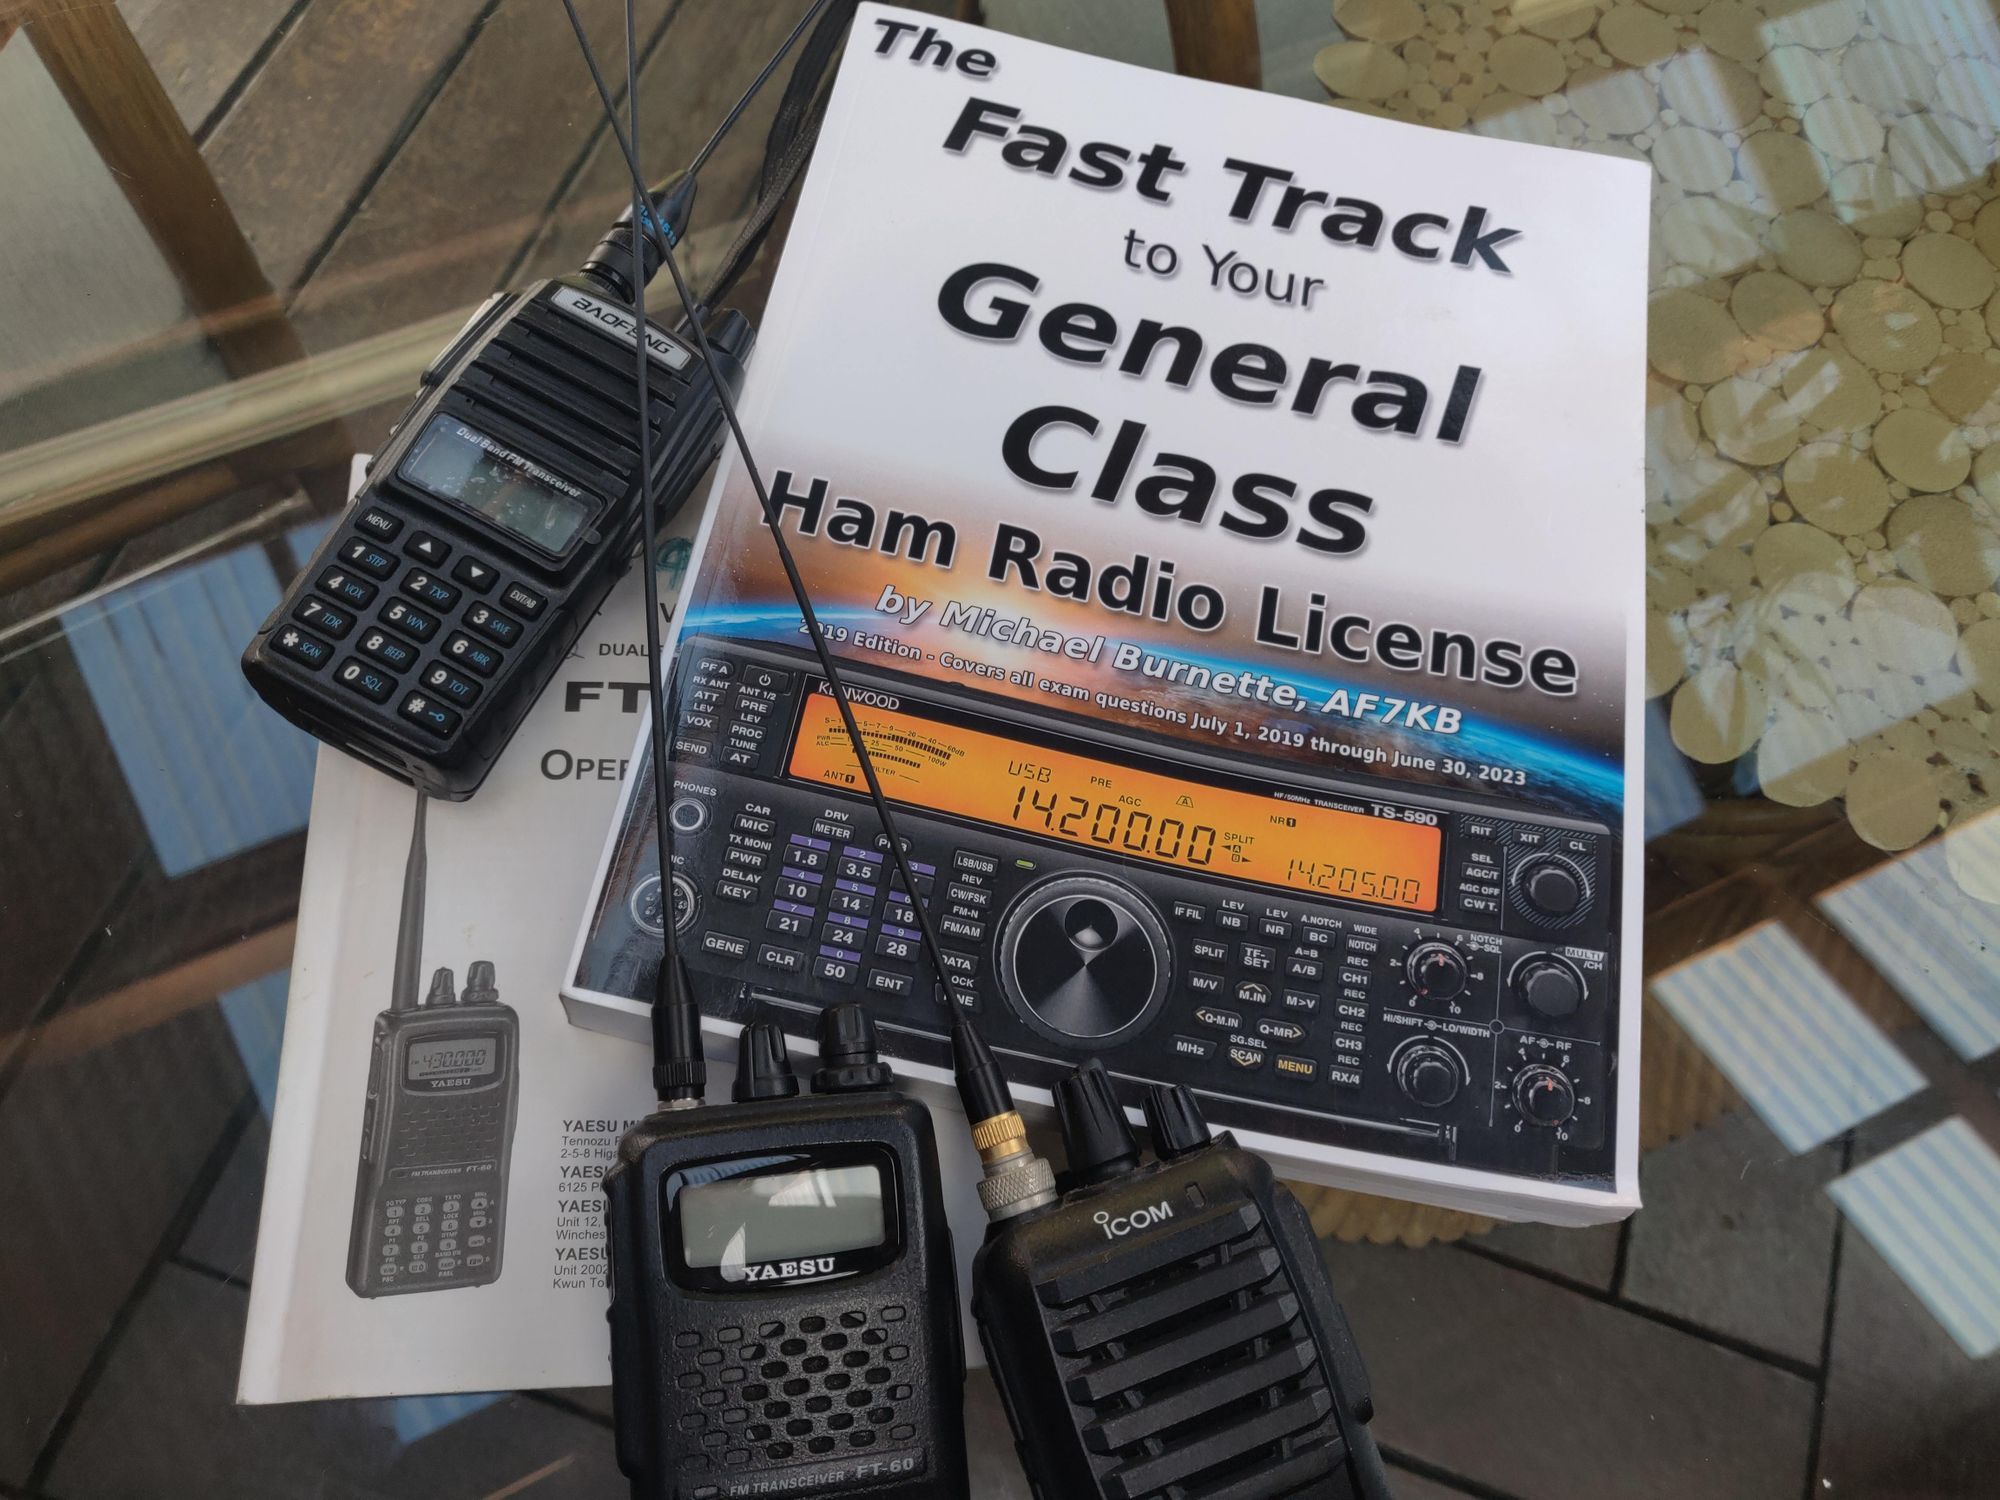 Come get your Ham Radio license with us!